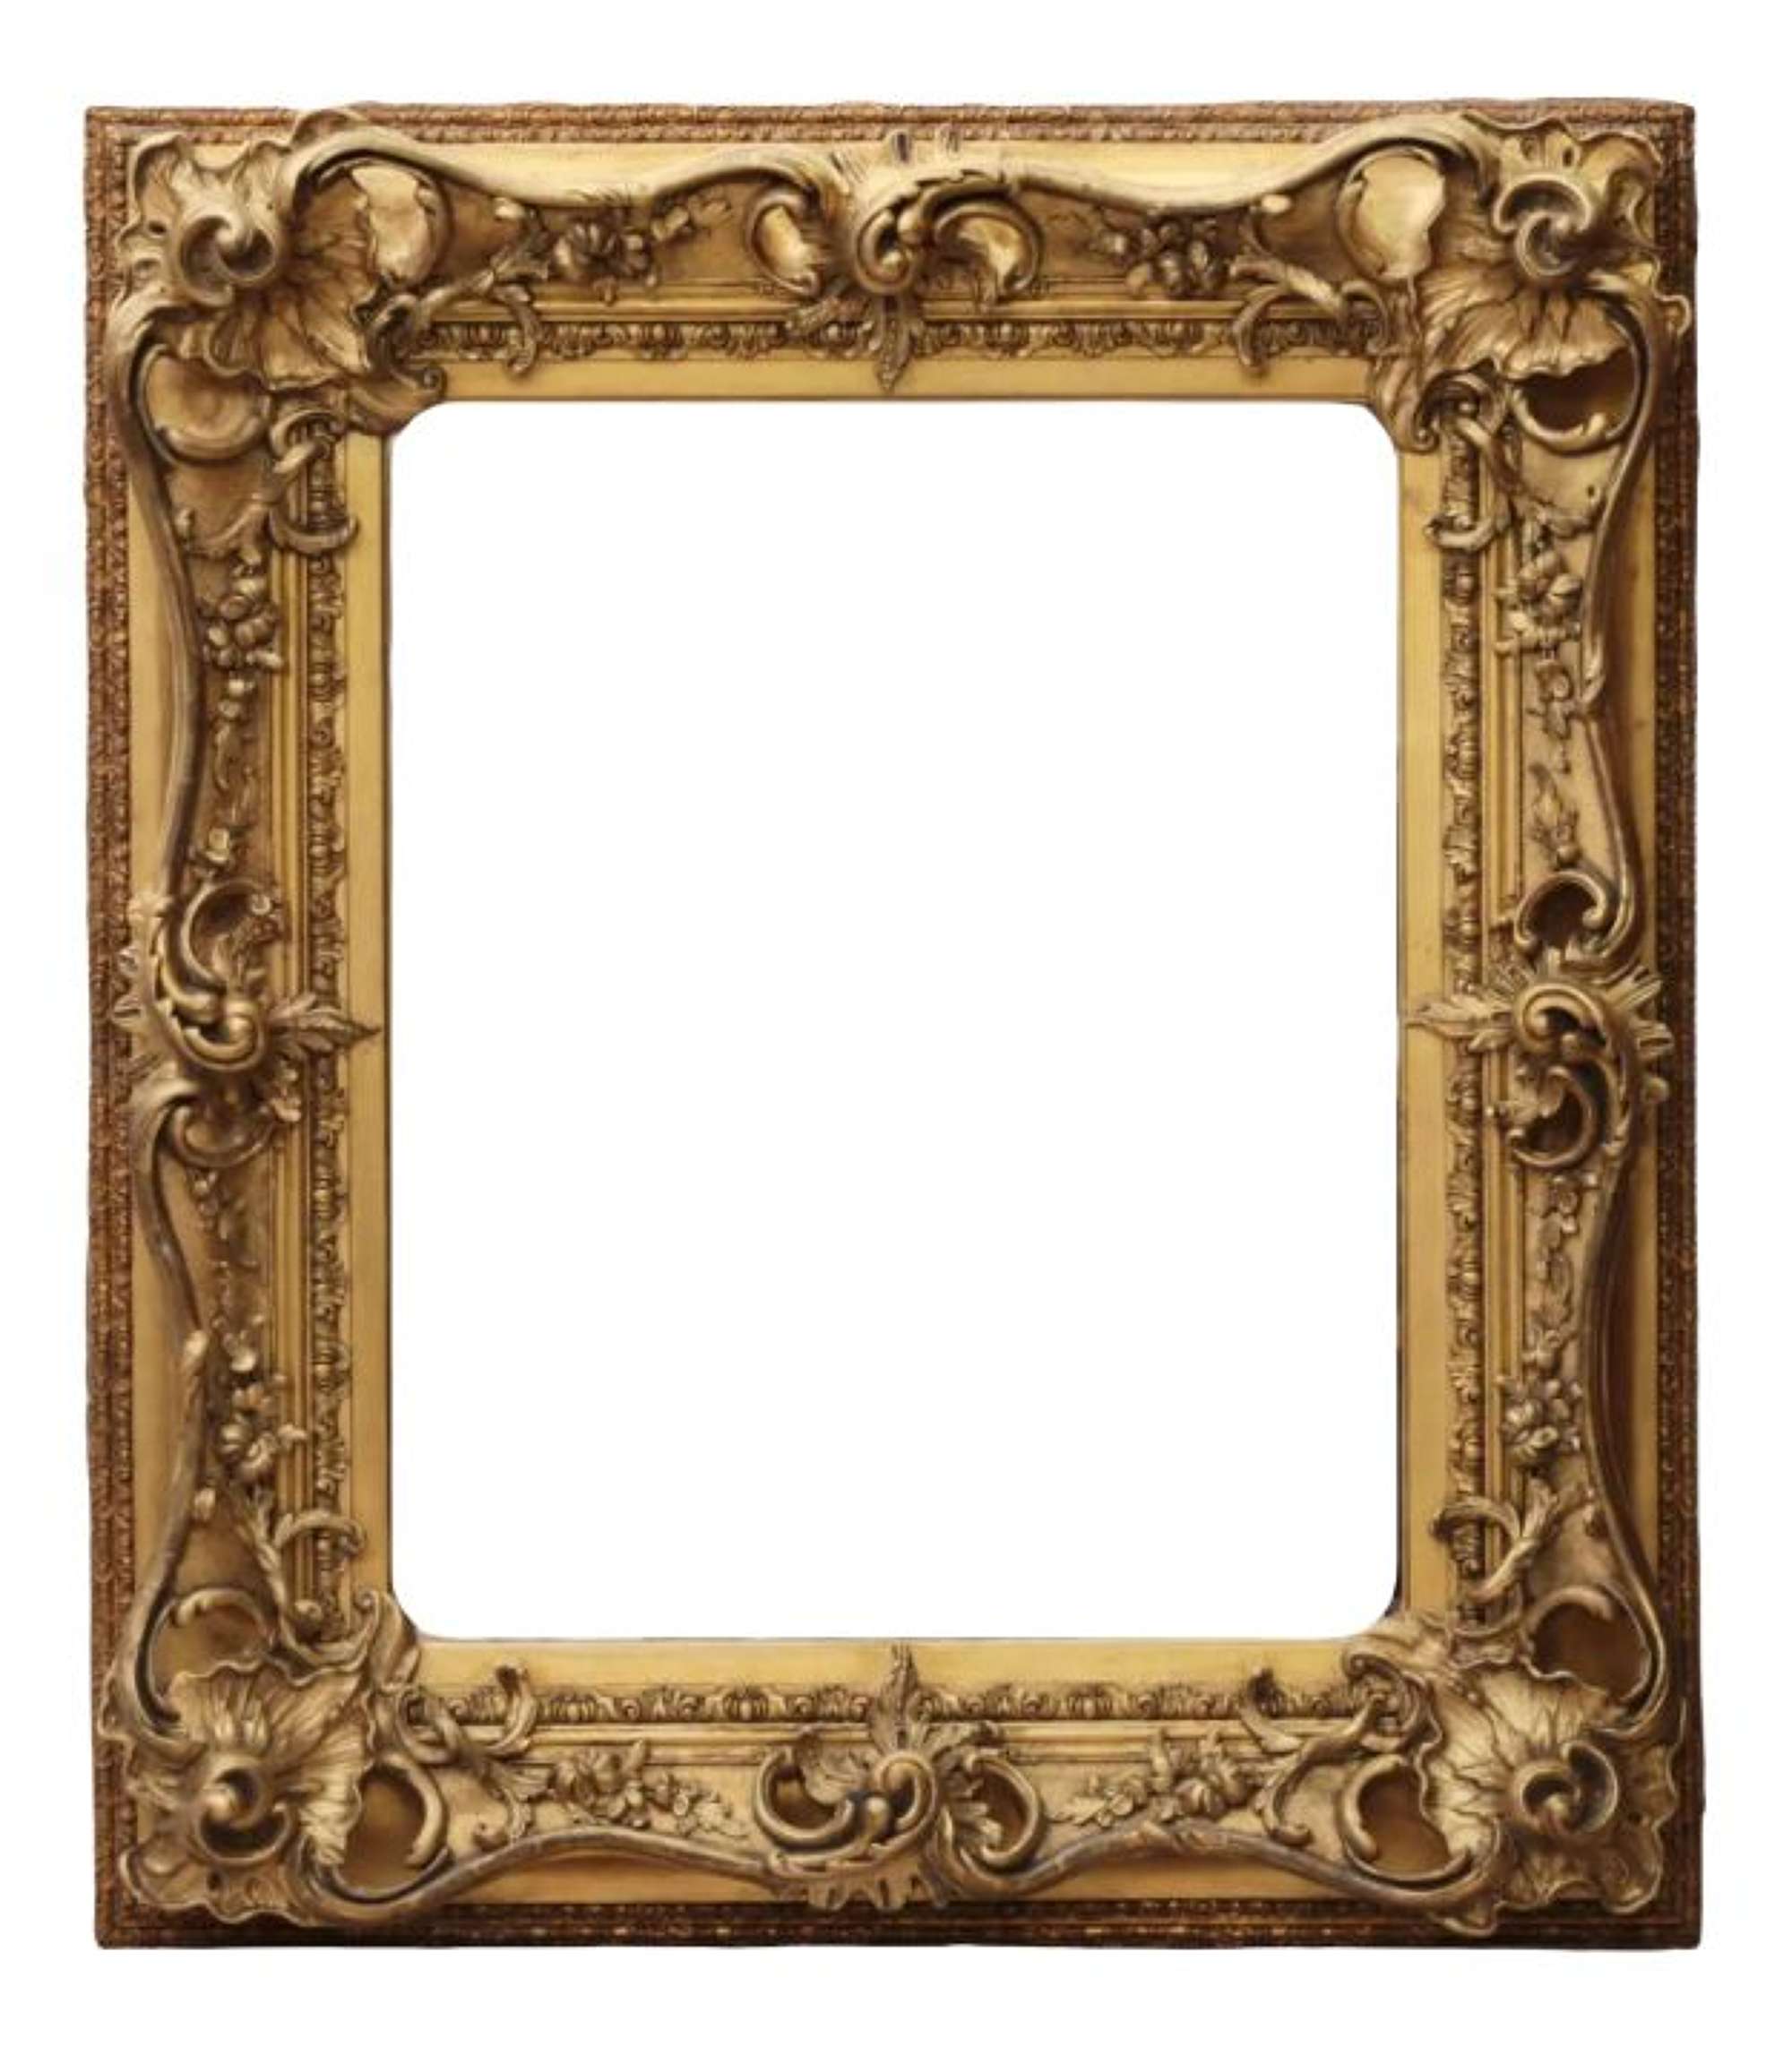 Neo-Rococo Style Mirror in Frame, 19th Century